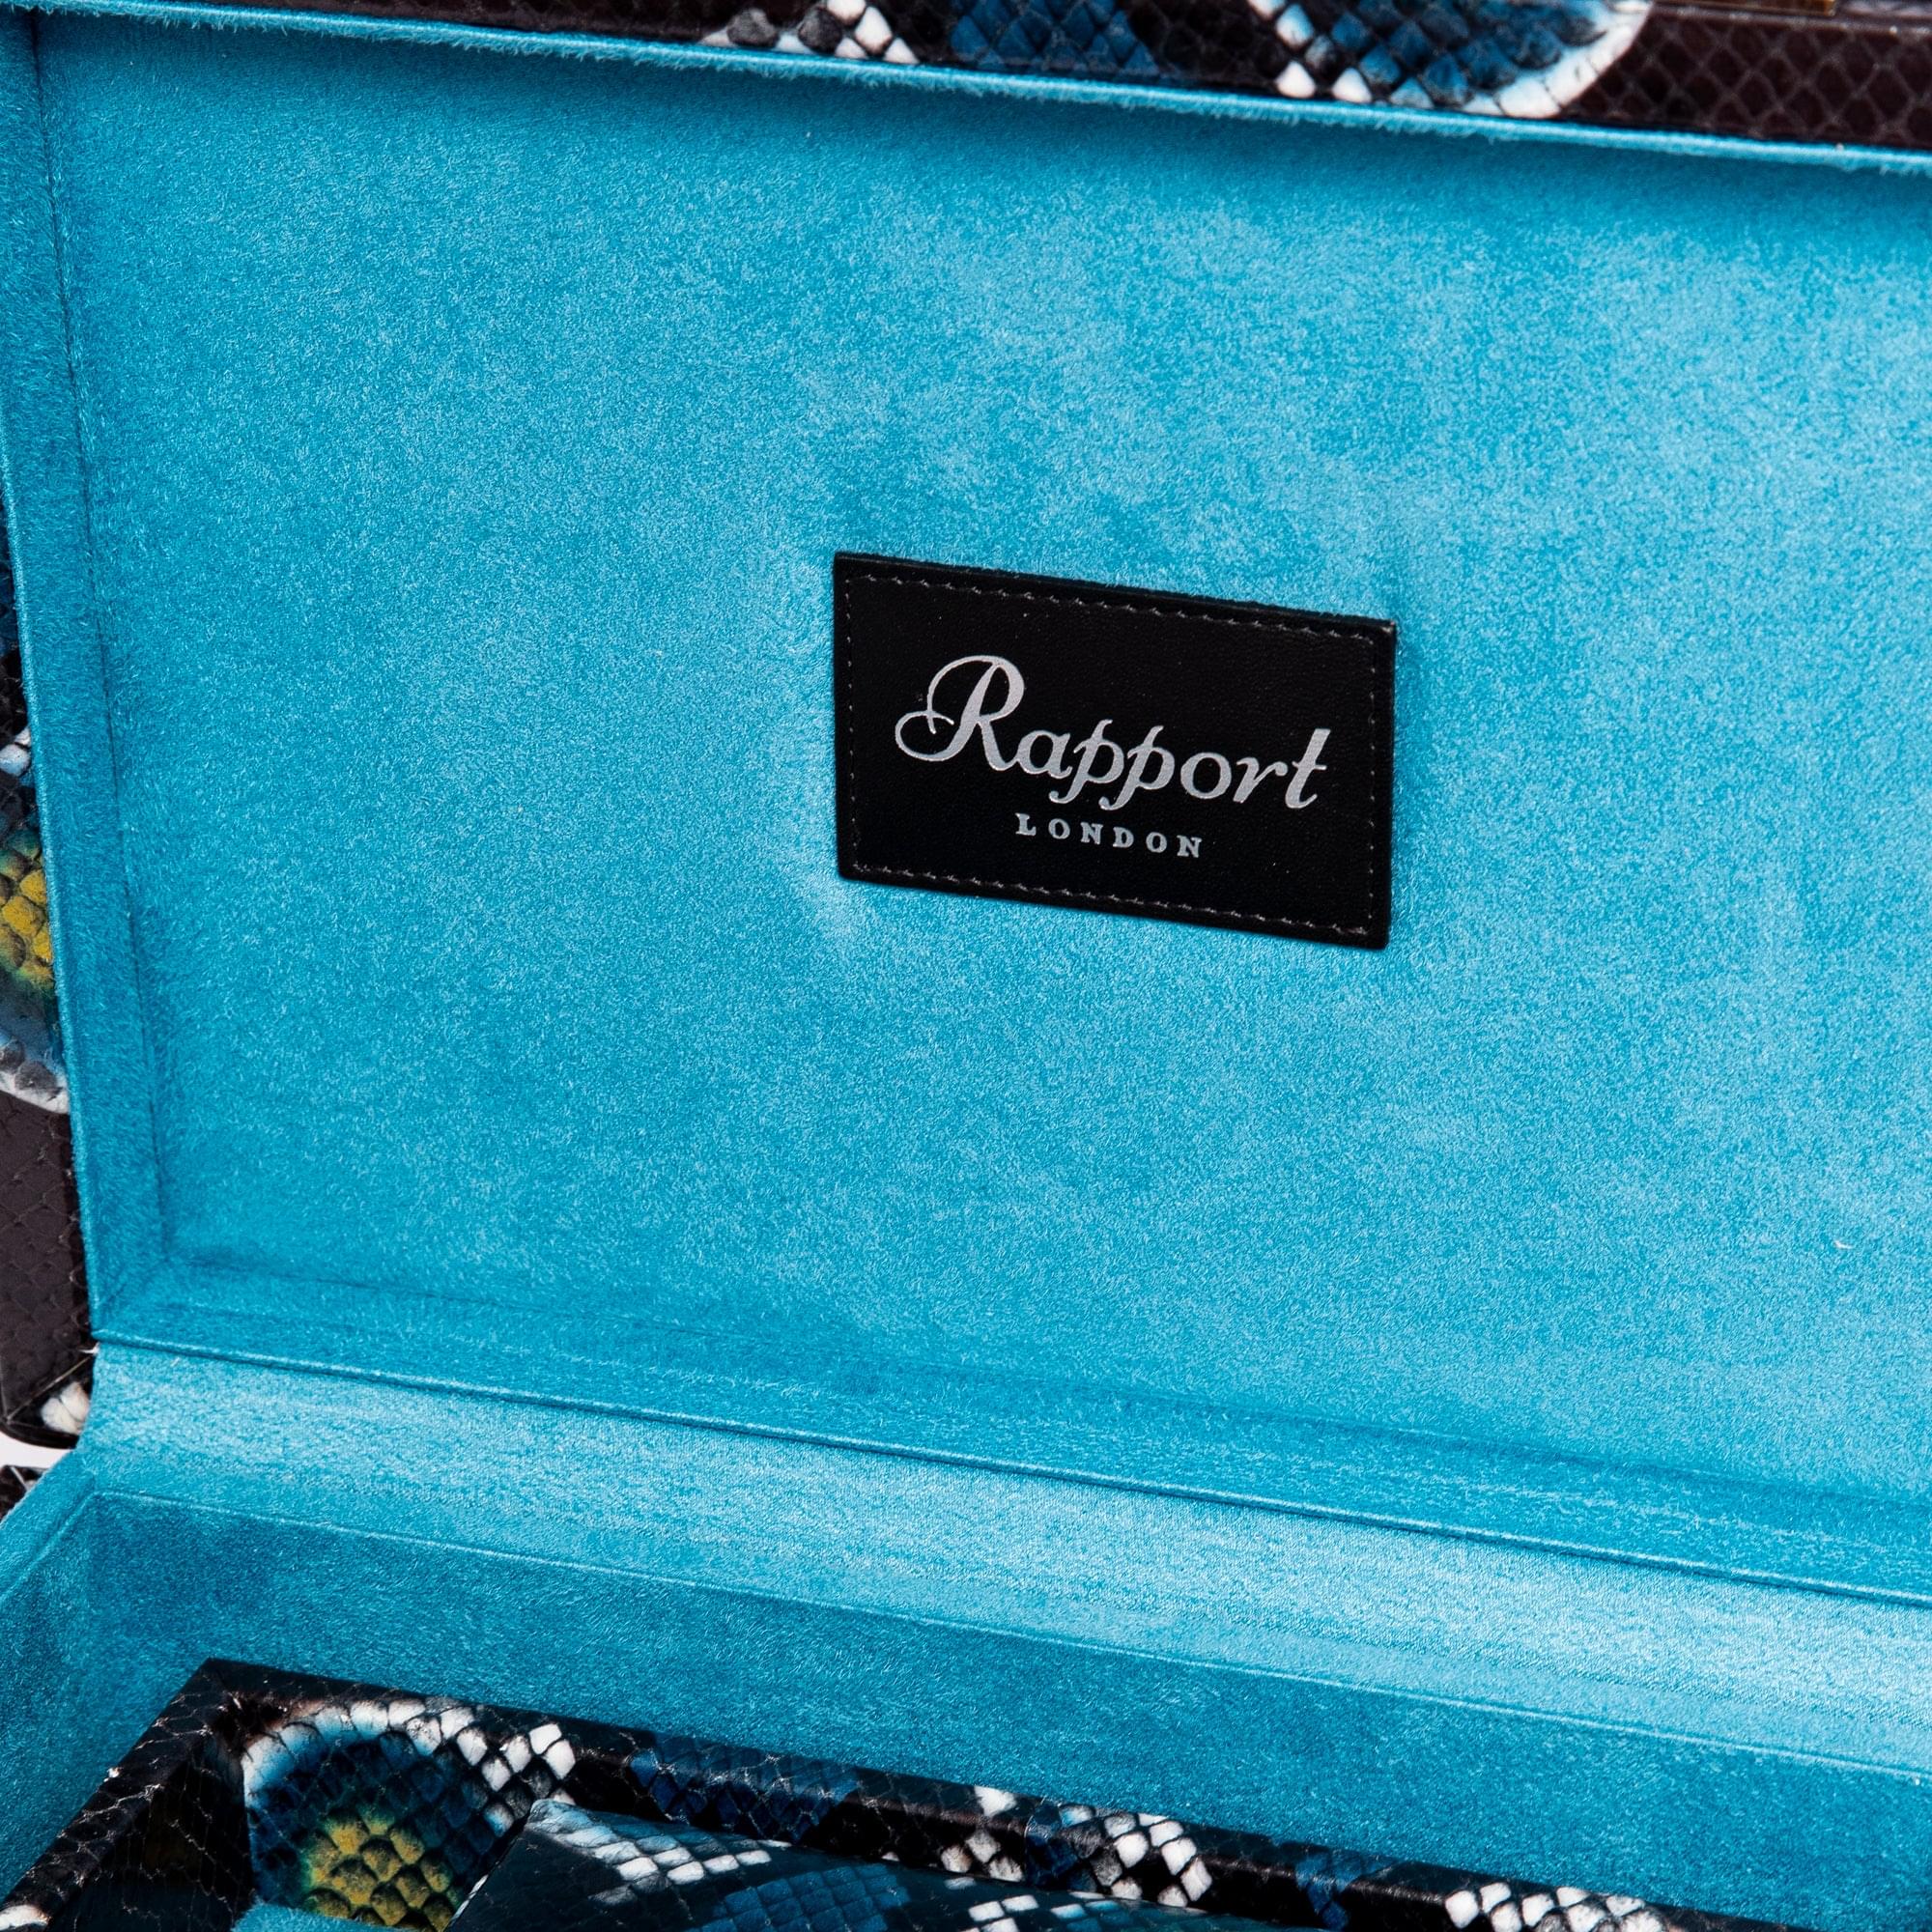 Amour Deluxe Jewellery Trunk - Blue